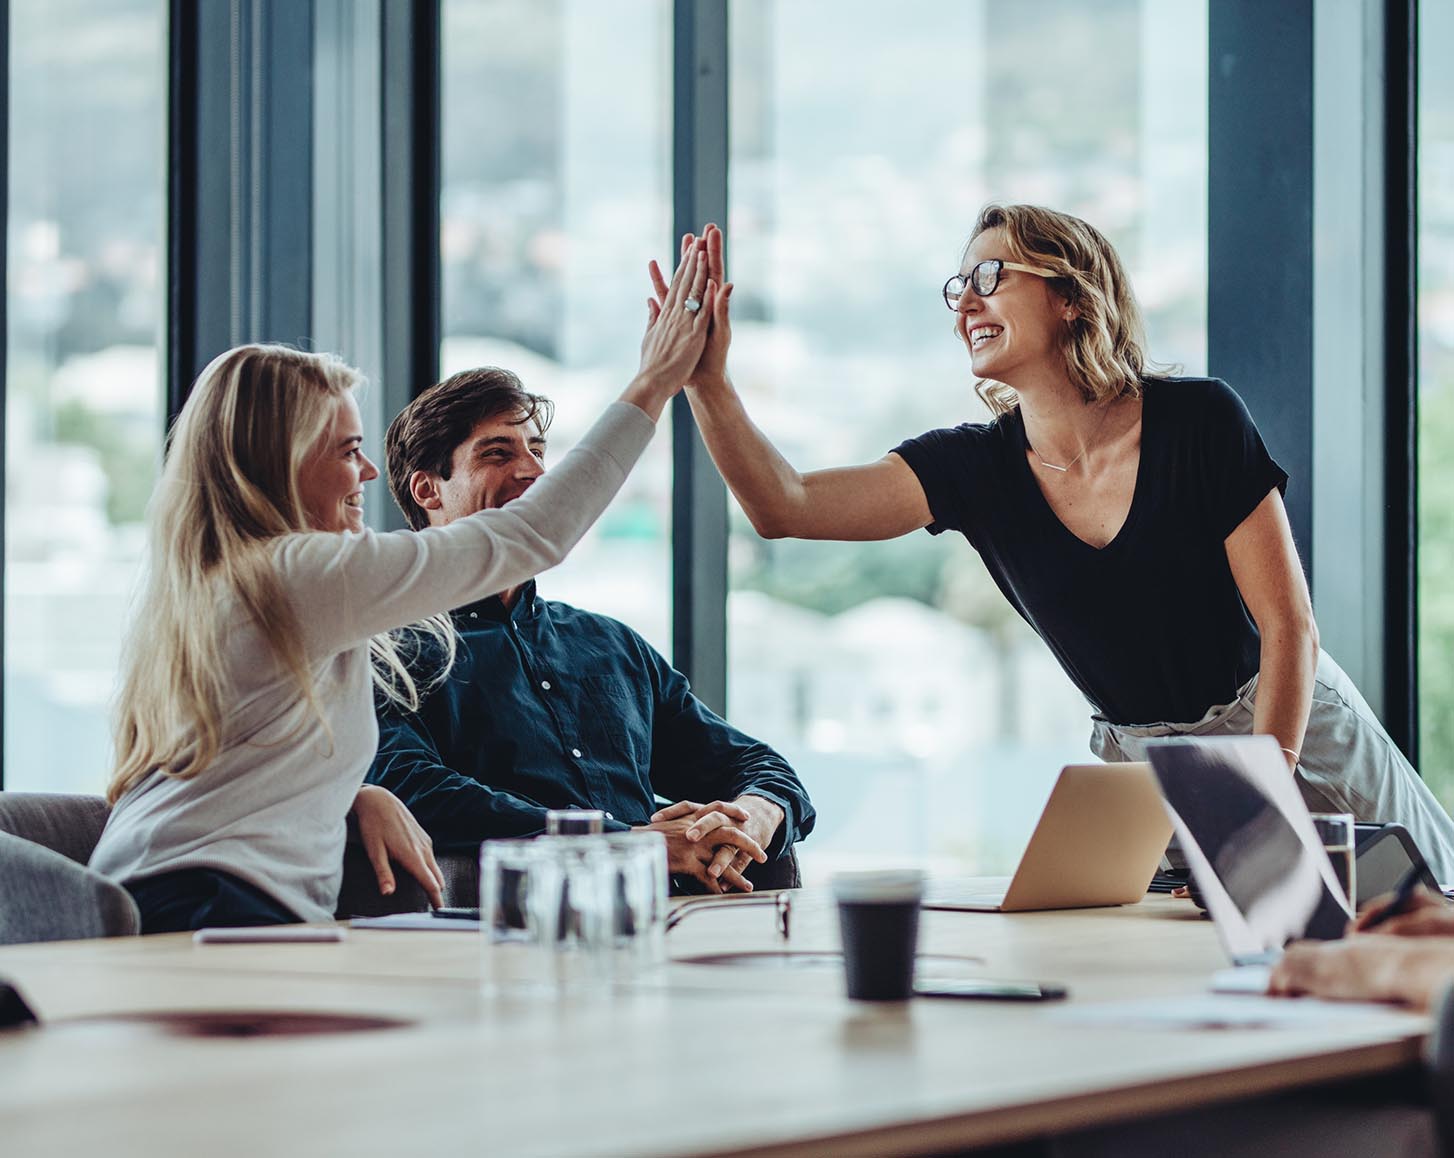 Two women give each other a high five in a meeting